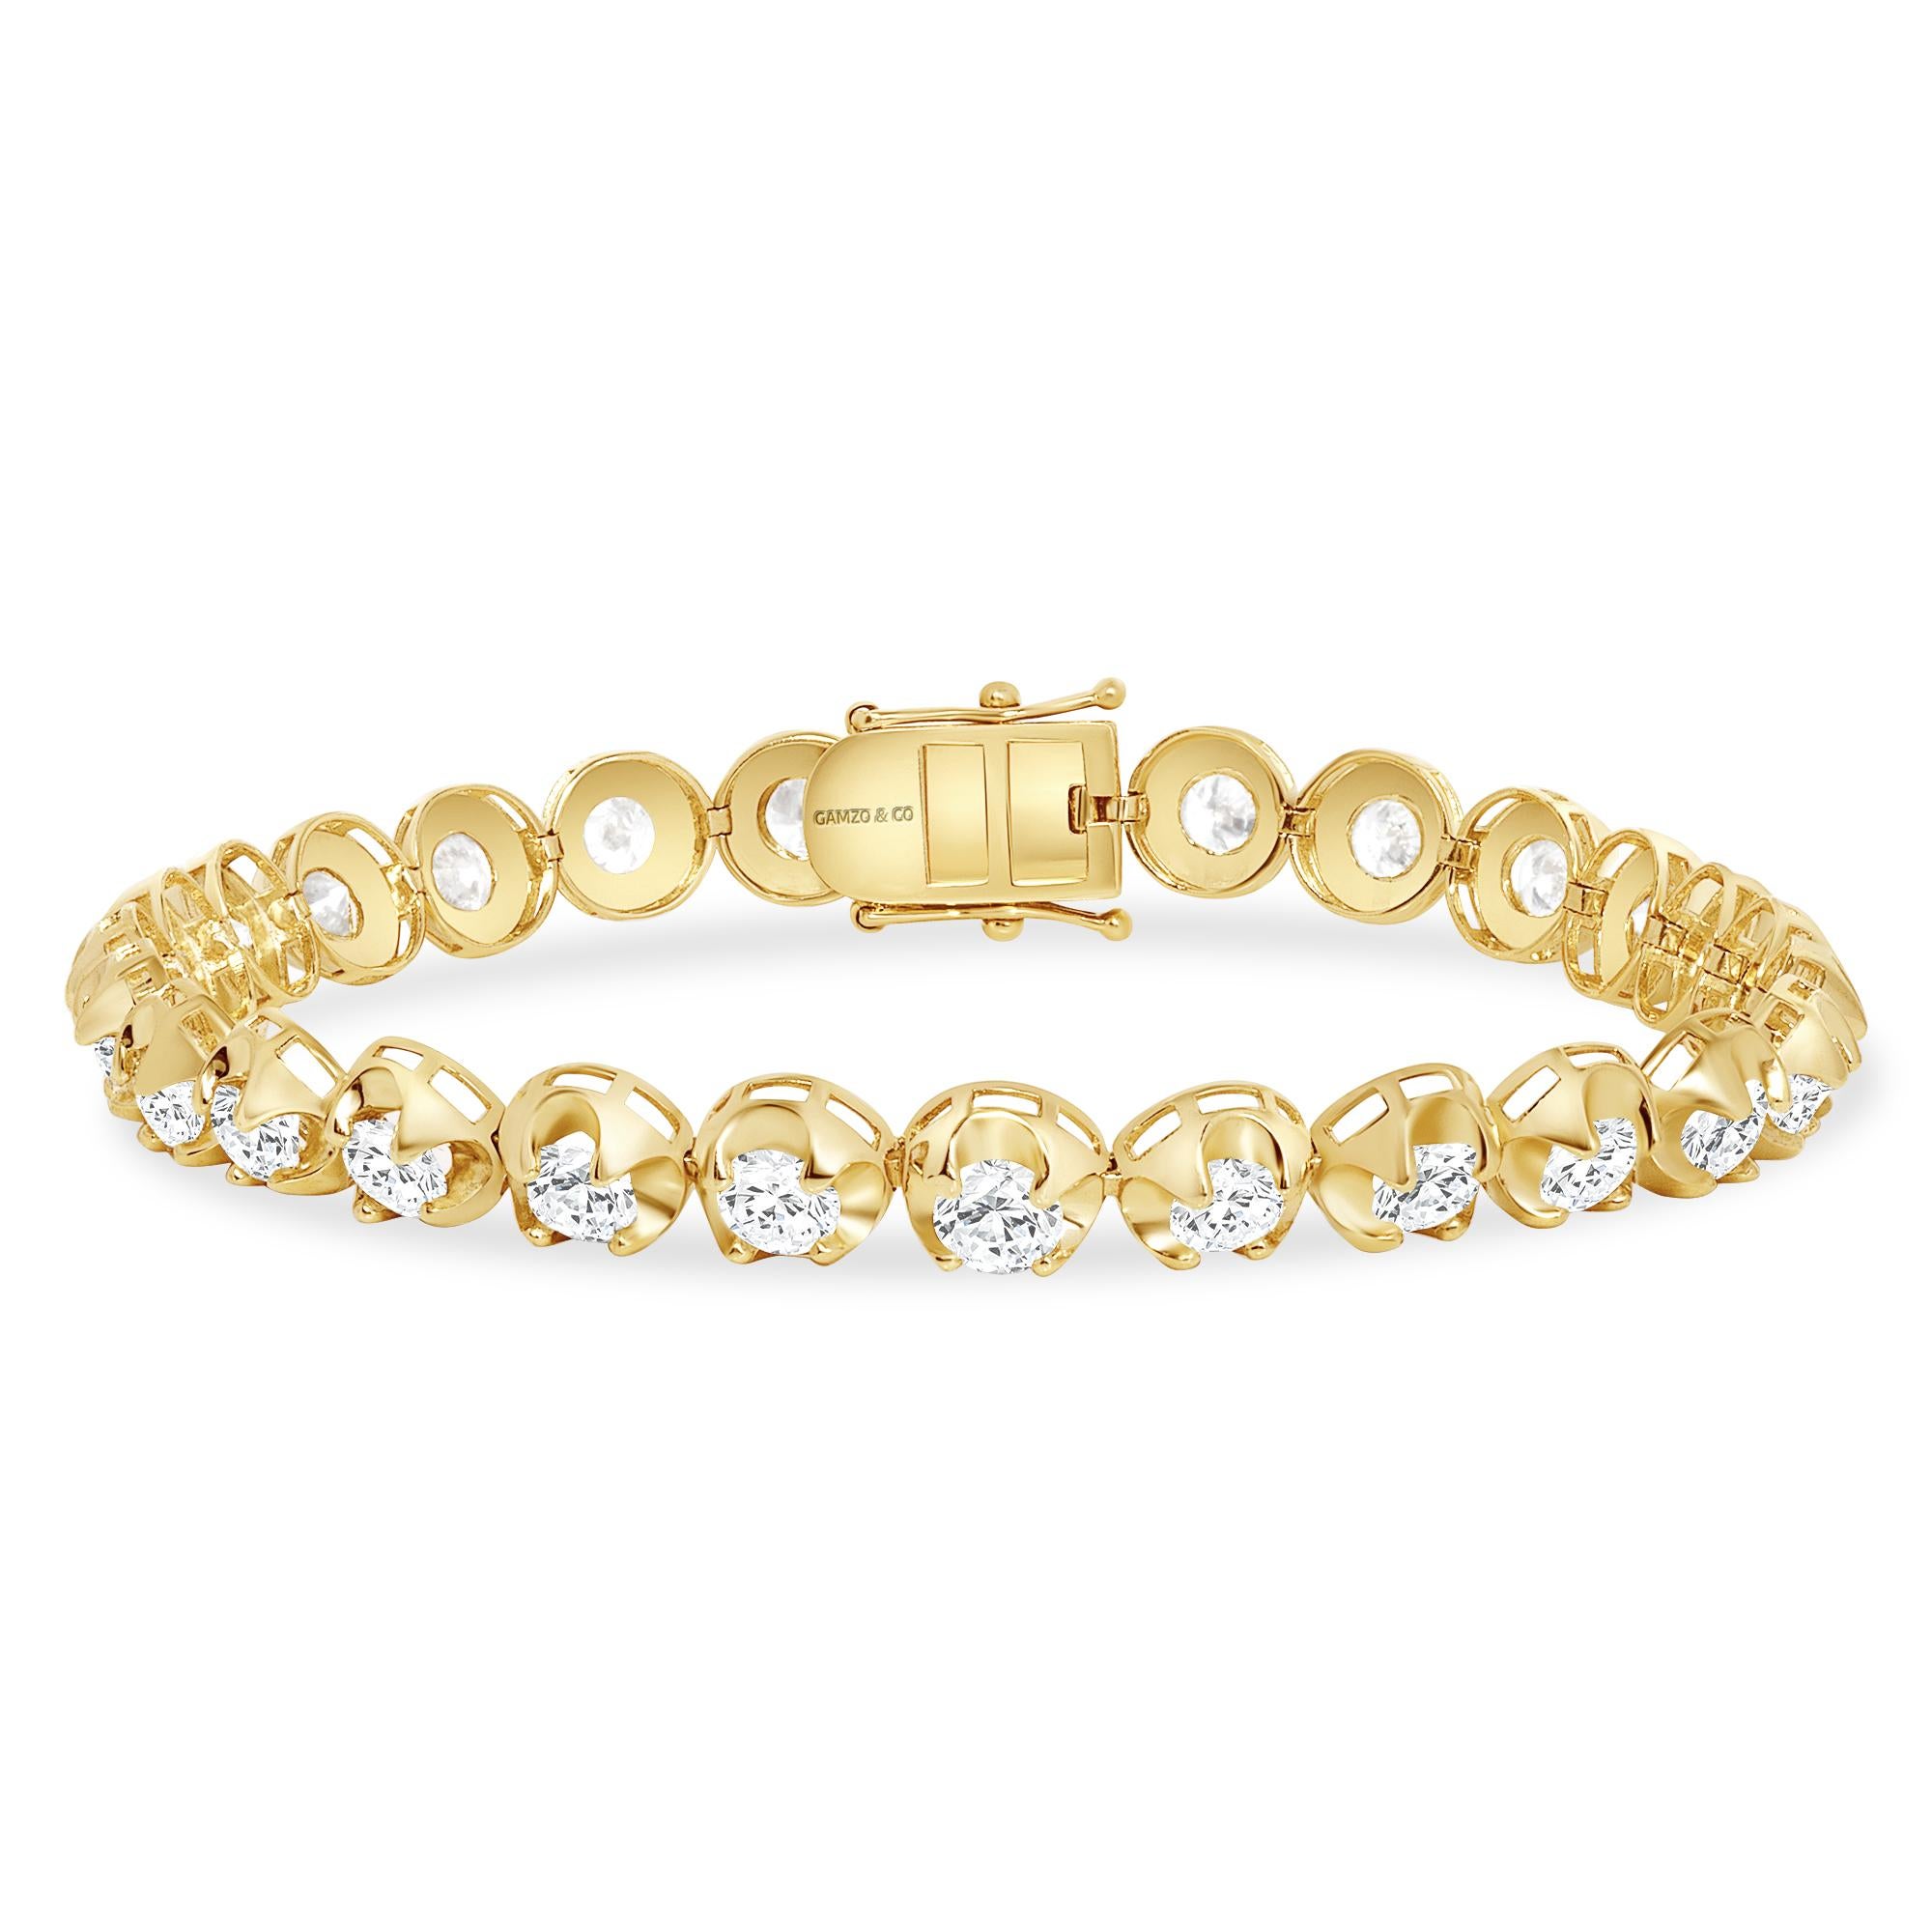 These beautiful round diamonds dance around your wrist as they absorb light and attention.
Metal: 14k Gold
Diamond Cut: Round
Diamond Total Carats: 7ct
Diamond Clarity: VS
Diamond Color: F
Color: Yellow Gold
Bracelet Length: 5 Inches 
Included with